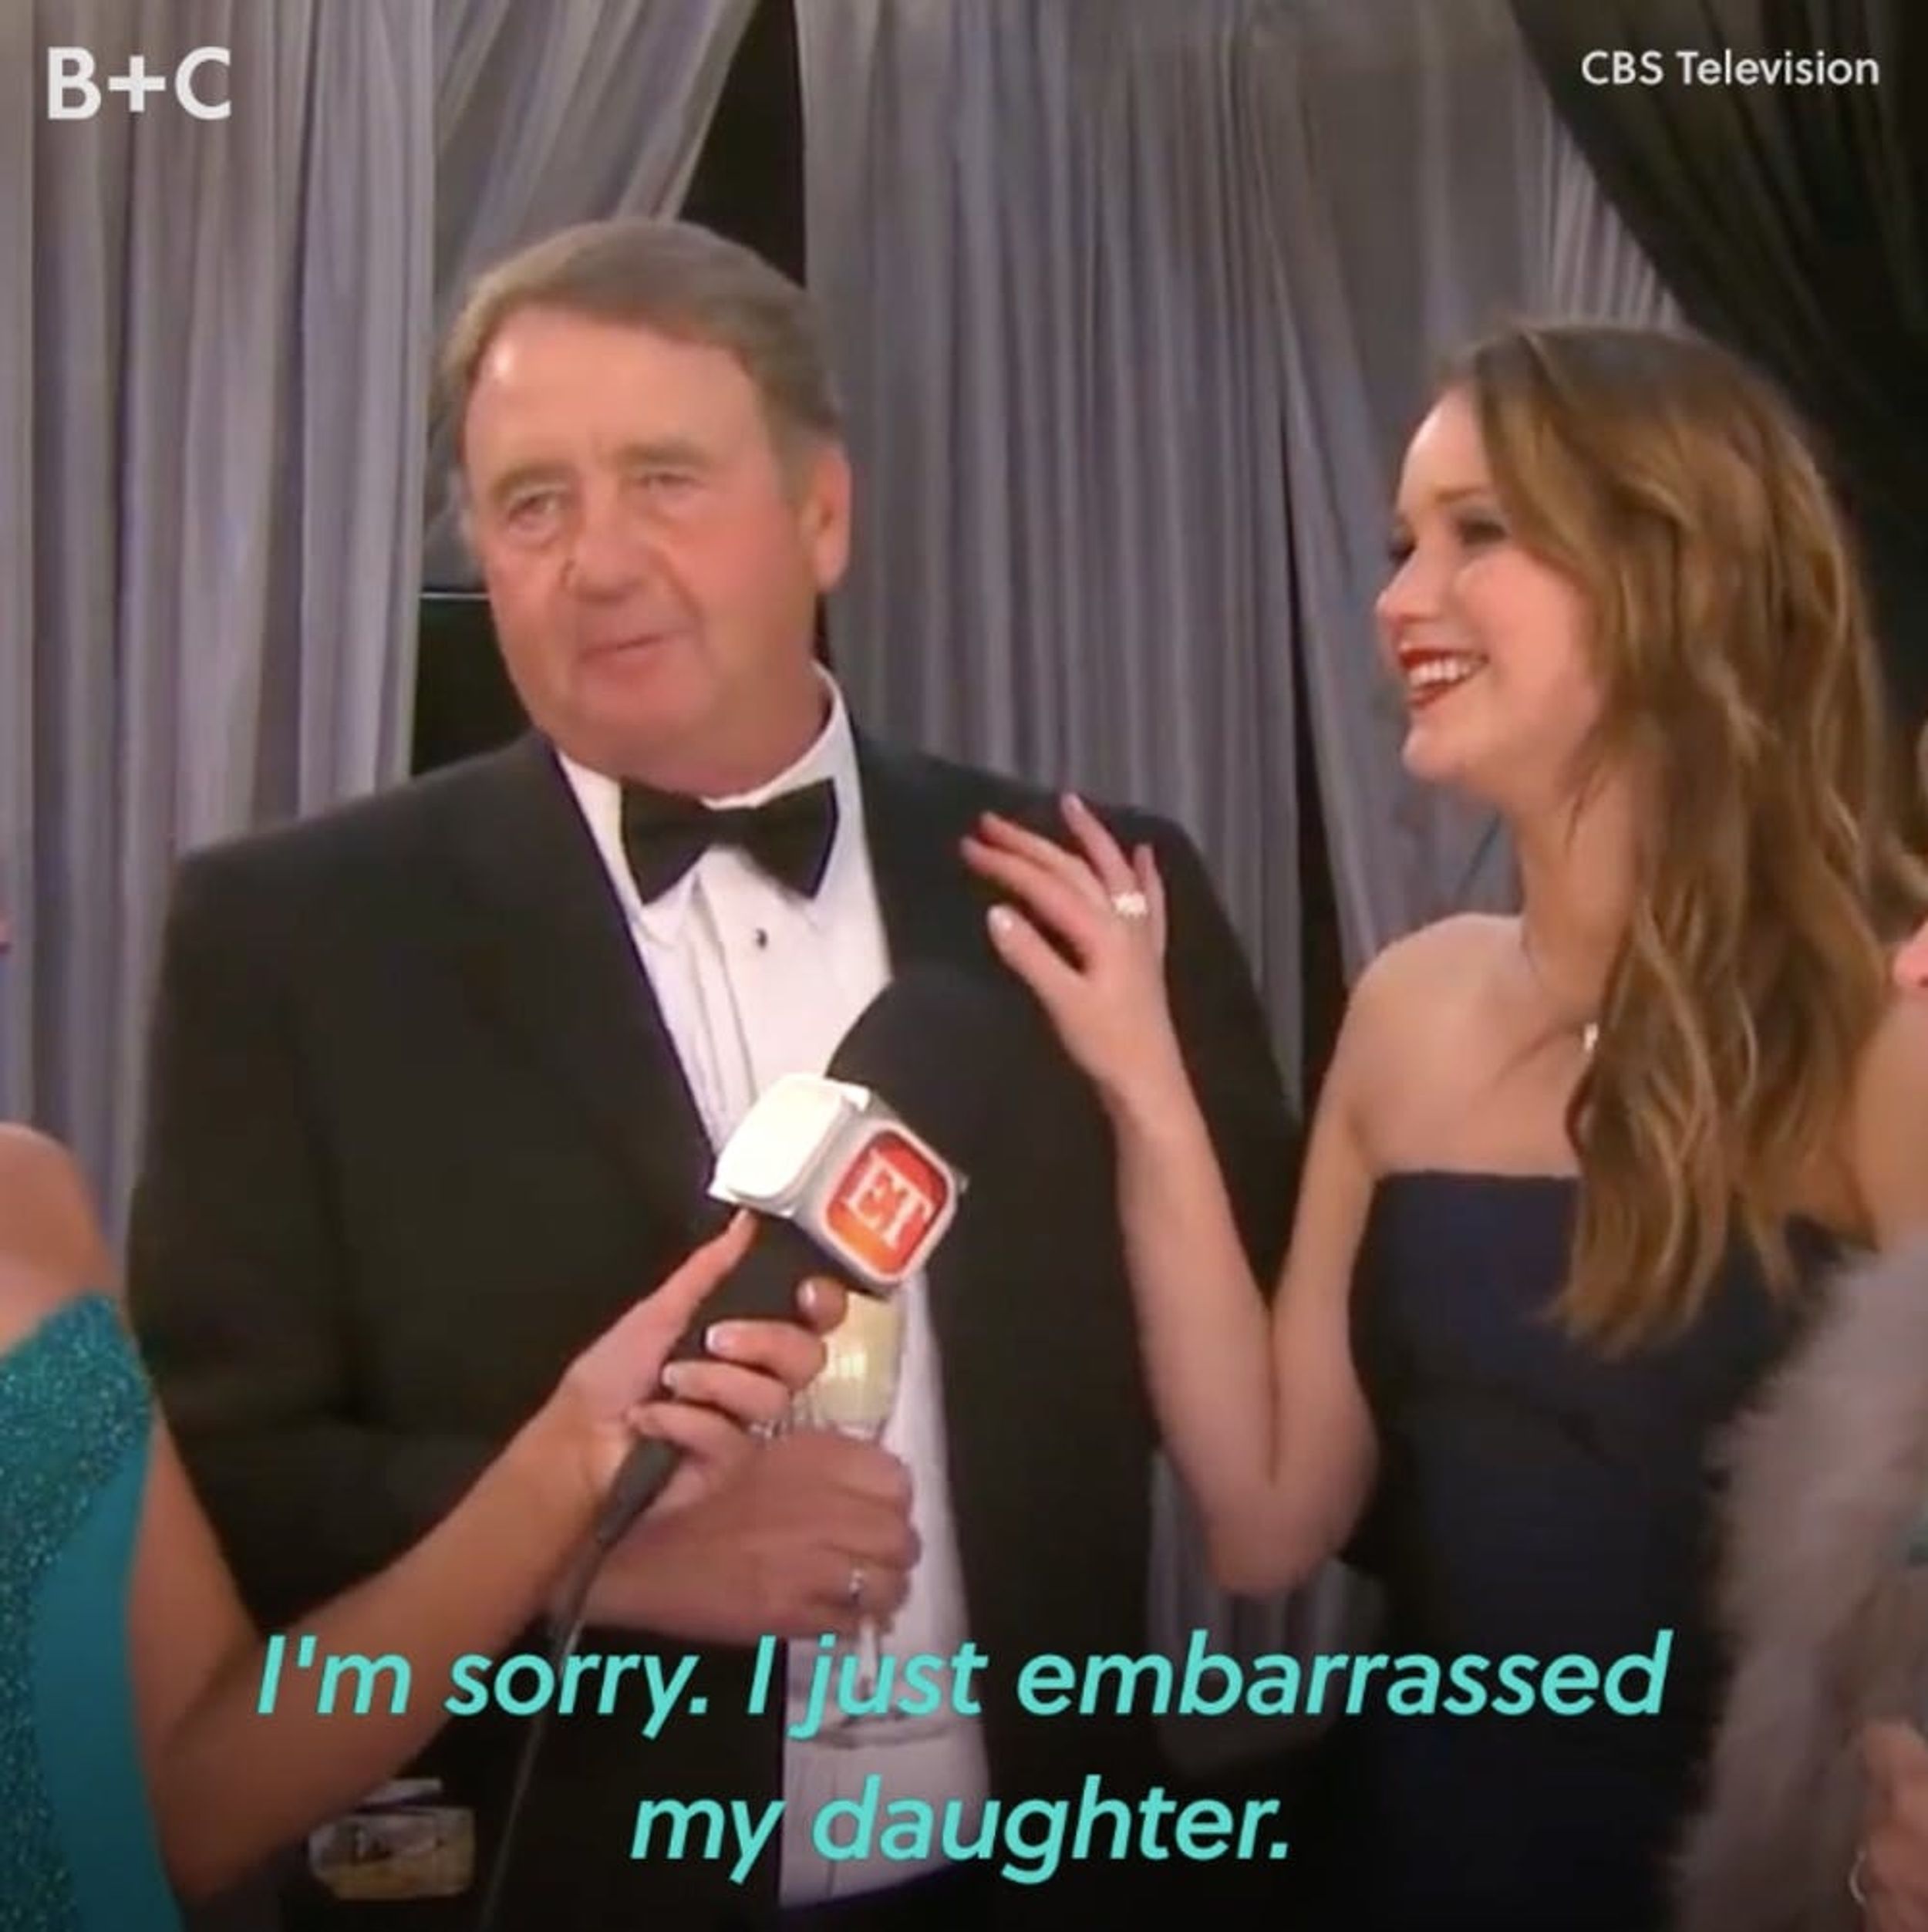 ICYMI, Jennifer Lawrenceâ€™s Parents Are Also Hilarious